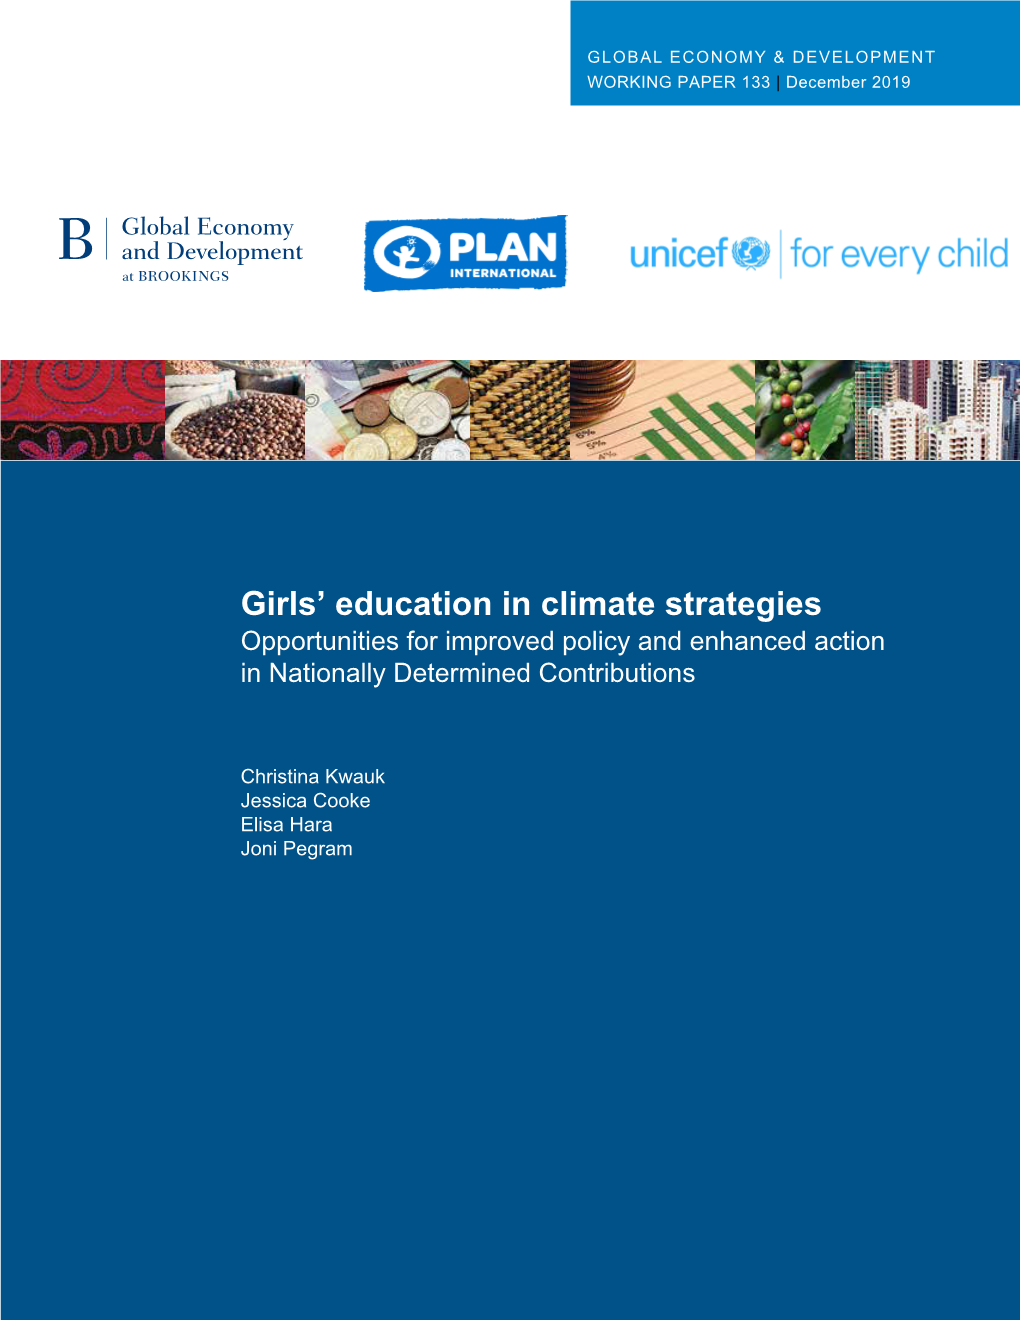 Girls' Education in Climate Strategies